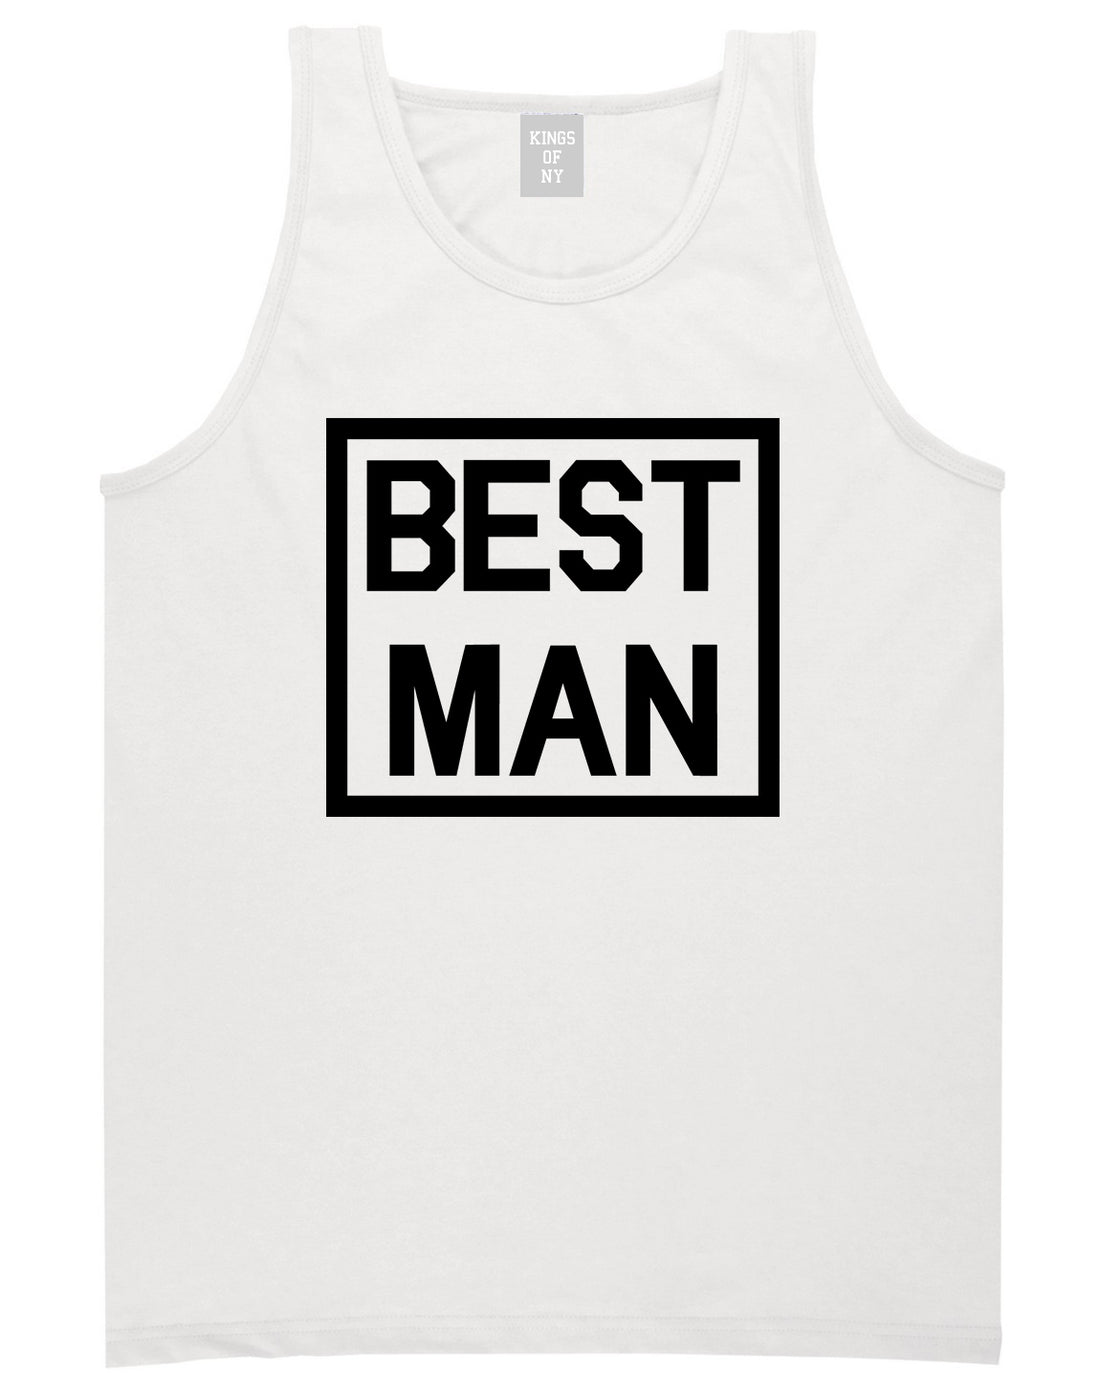 Best Man Bachelor Party White Tank Top Shirt by Kings Of NY